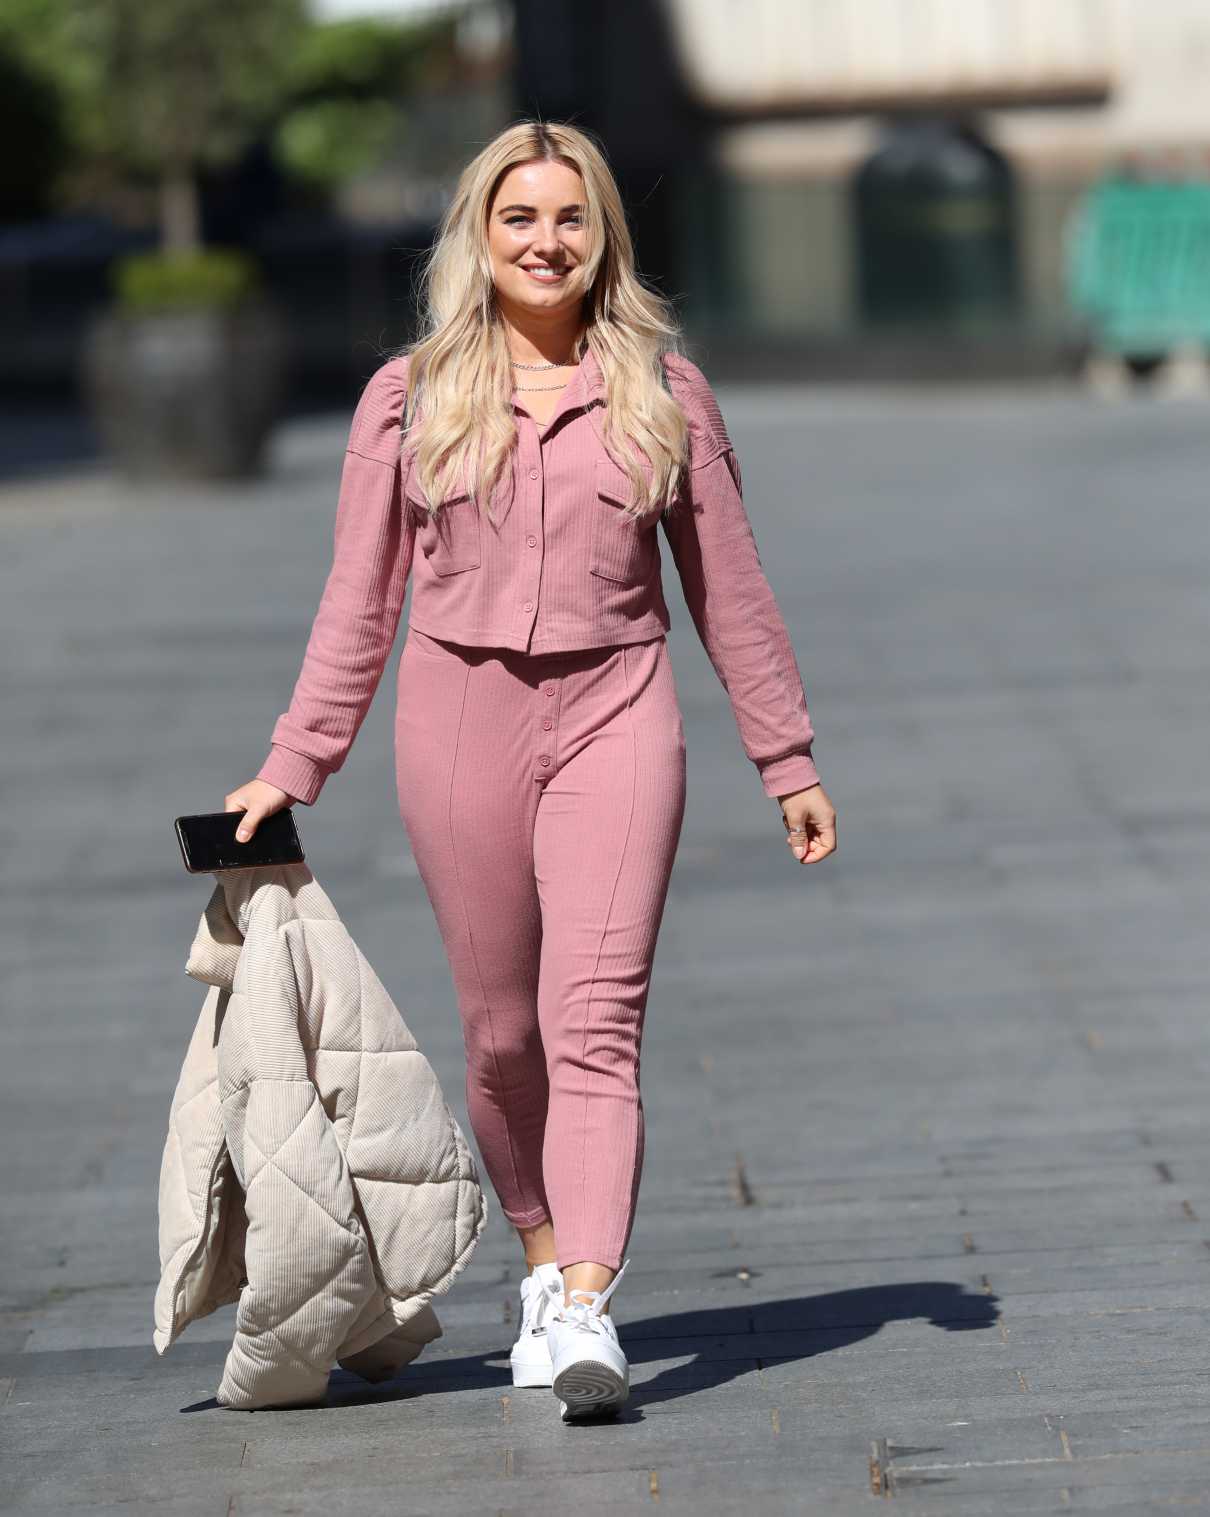 Sian Welby in a Pink Suit Arrives at Global Offices in London 05/18 ...